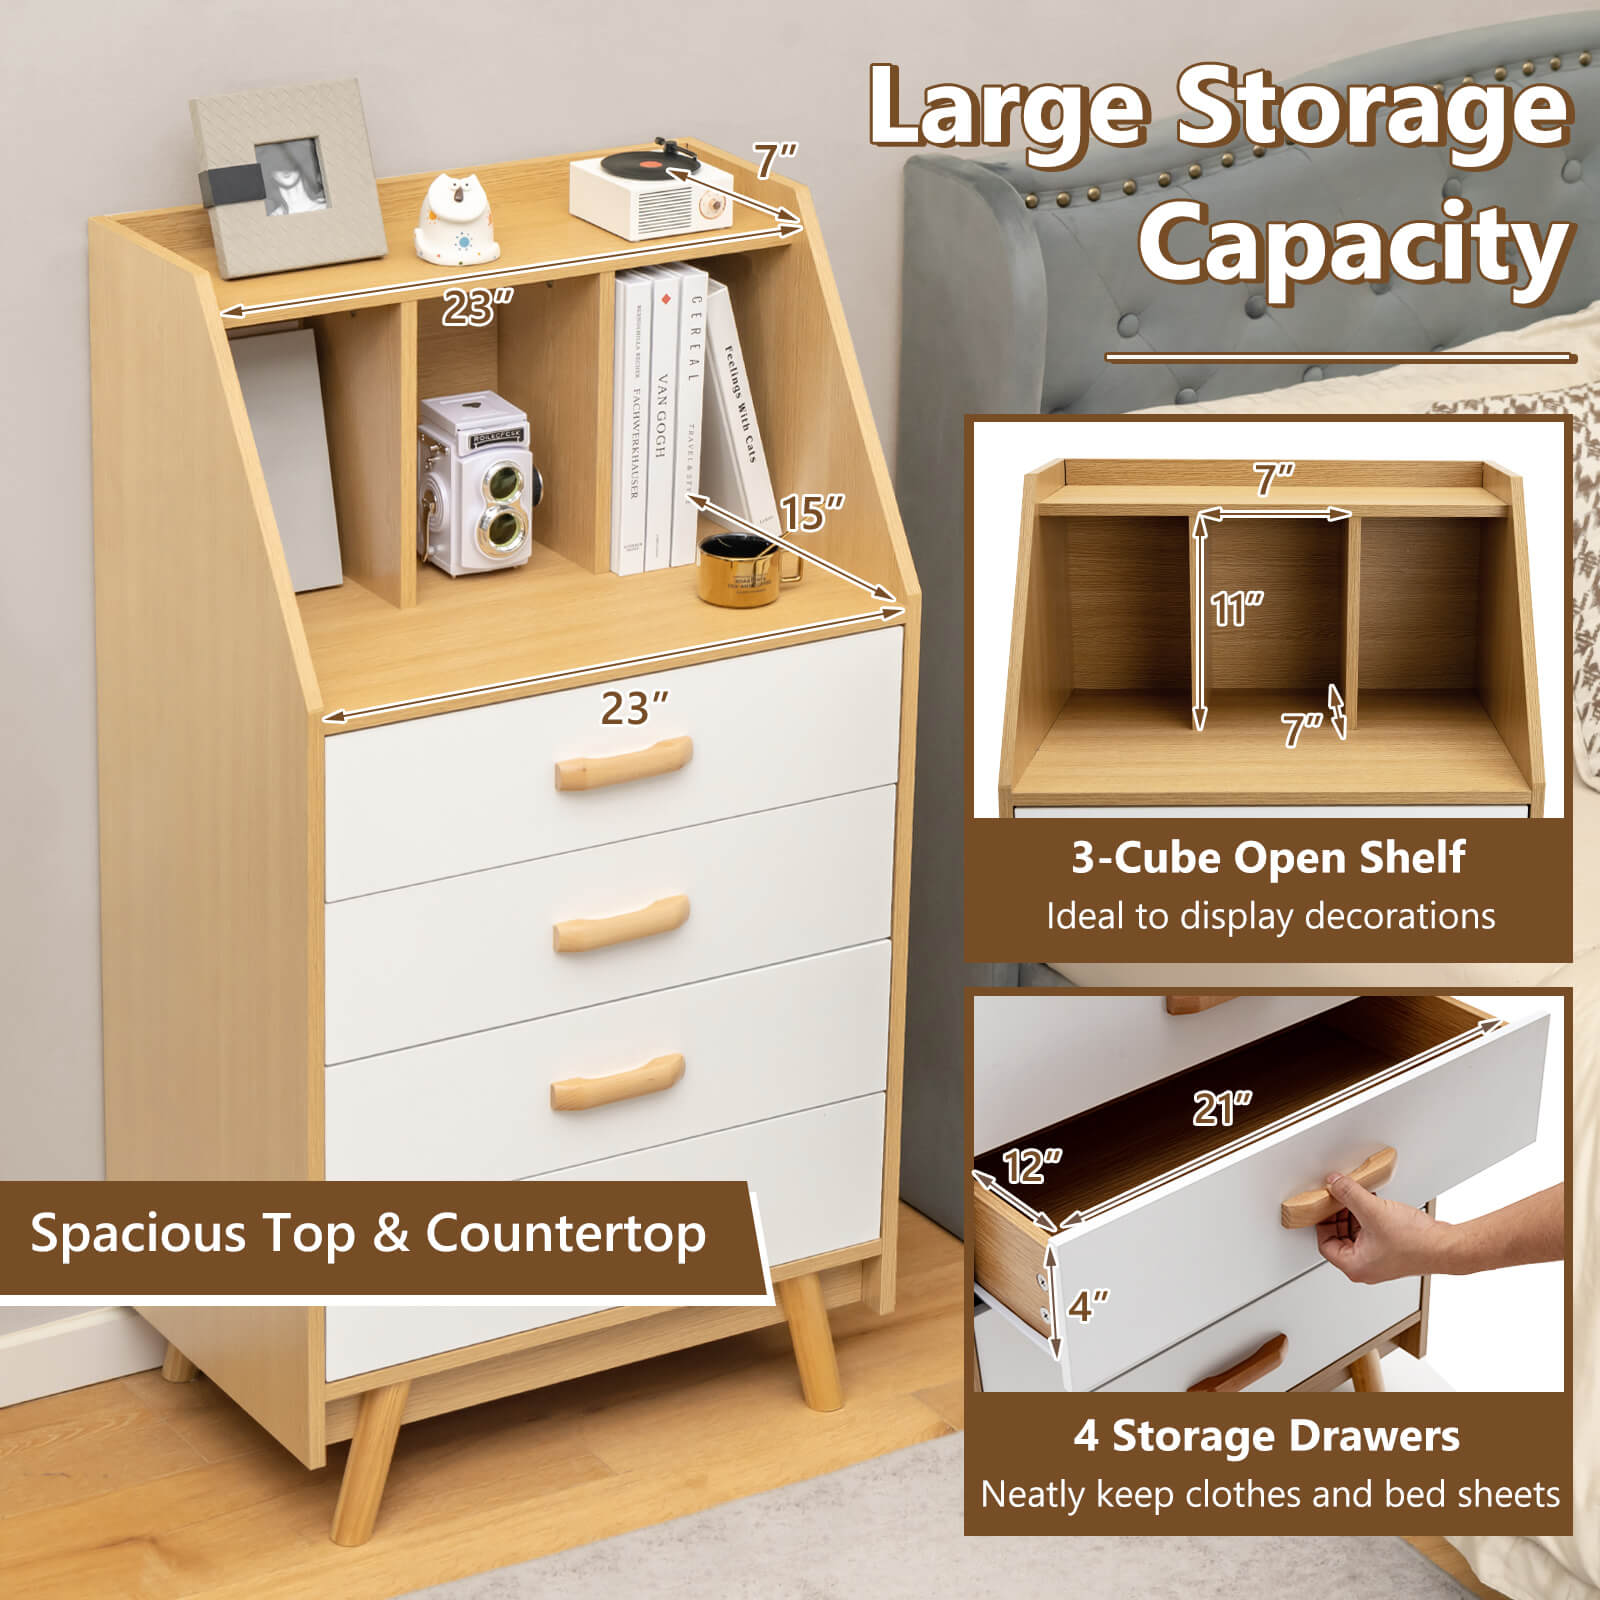 4-Drawer Dresser with 2 Anti-Tipping Kits for Bedroom, Natural - Gallery Canada